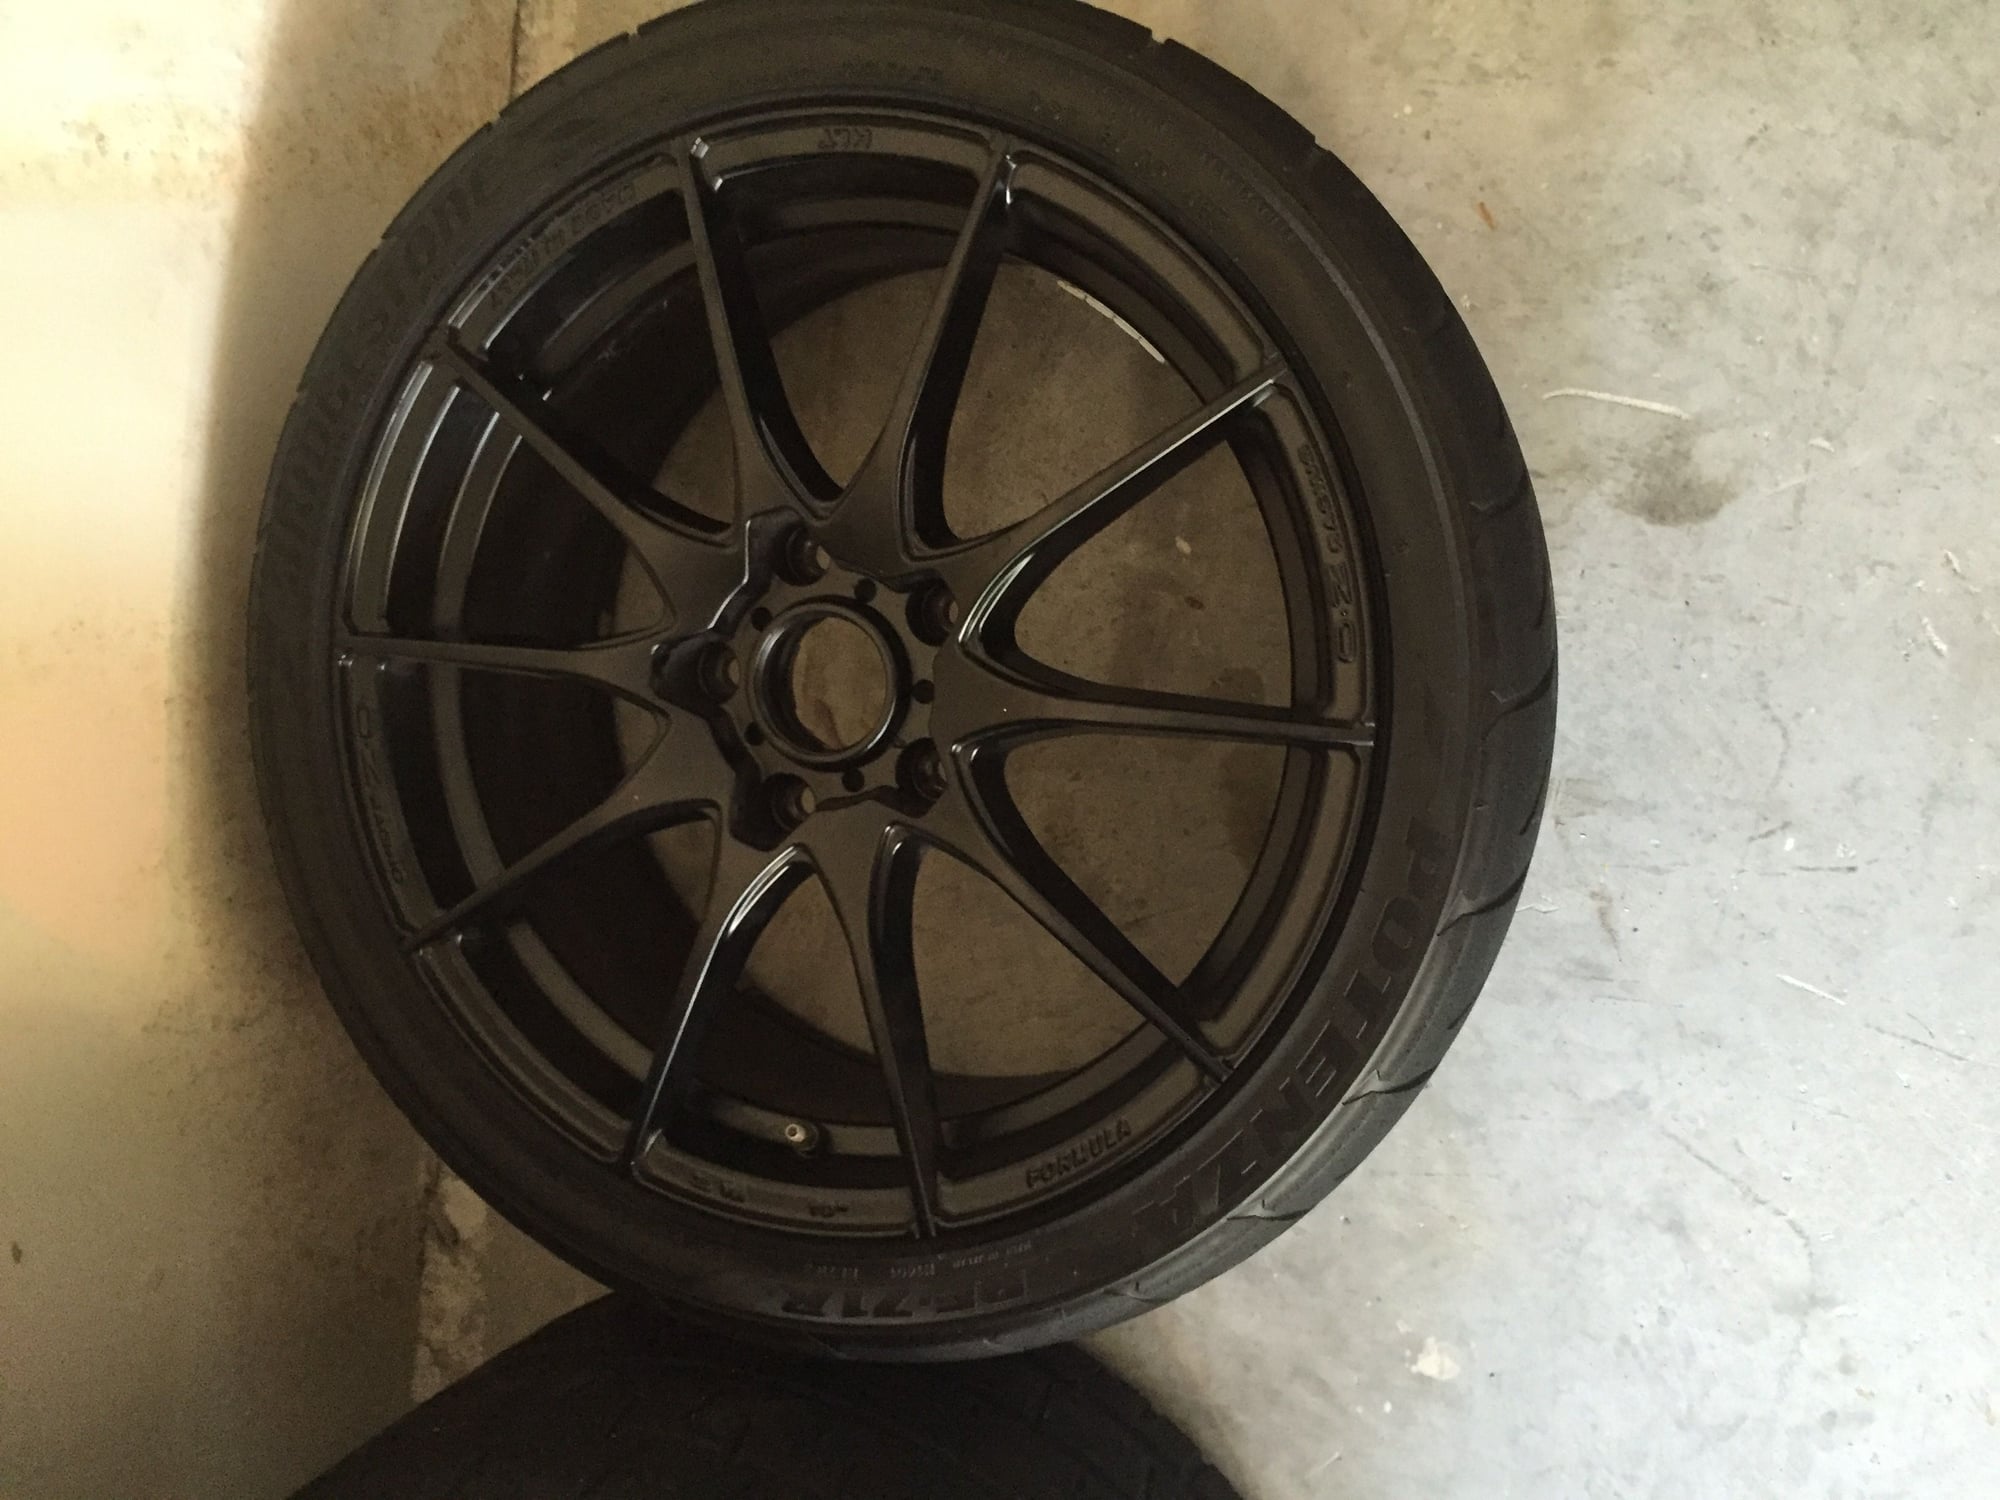 Wheels and Tires/Axles - Porsche 991 OZ Wheels - Black - 19" for Track use - Used - 2012 to 2019 Porsche 911 - Fort Lauderdale, FL 33331, United States